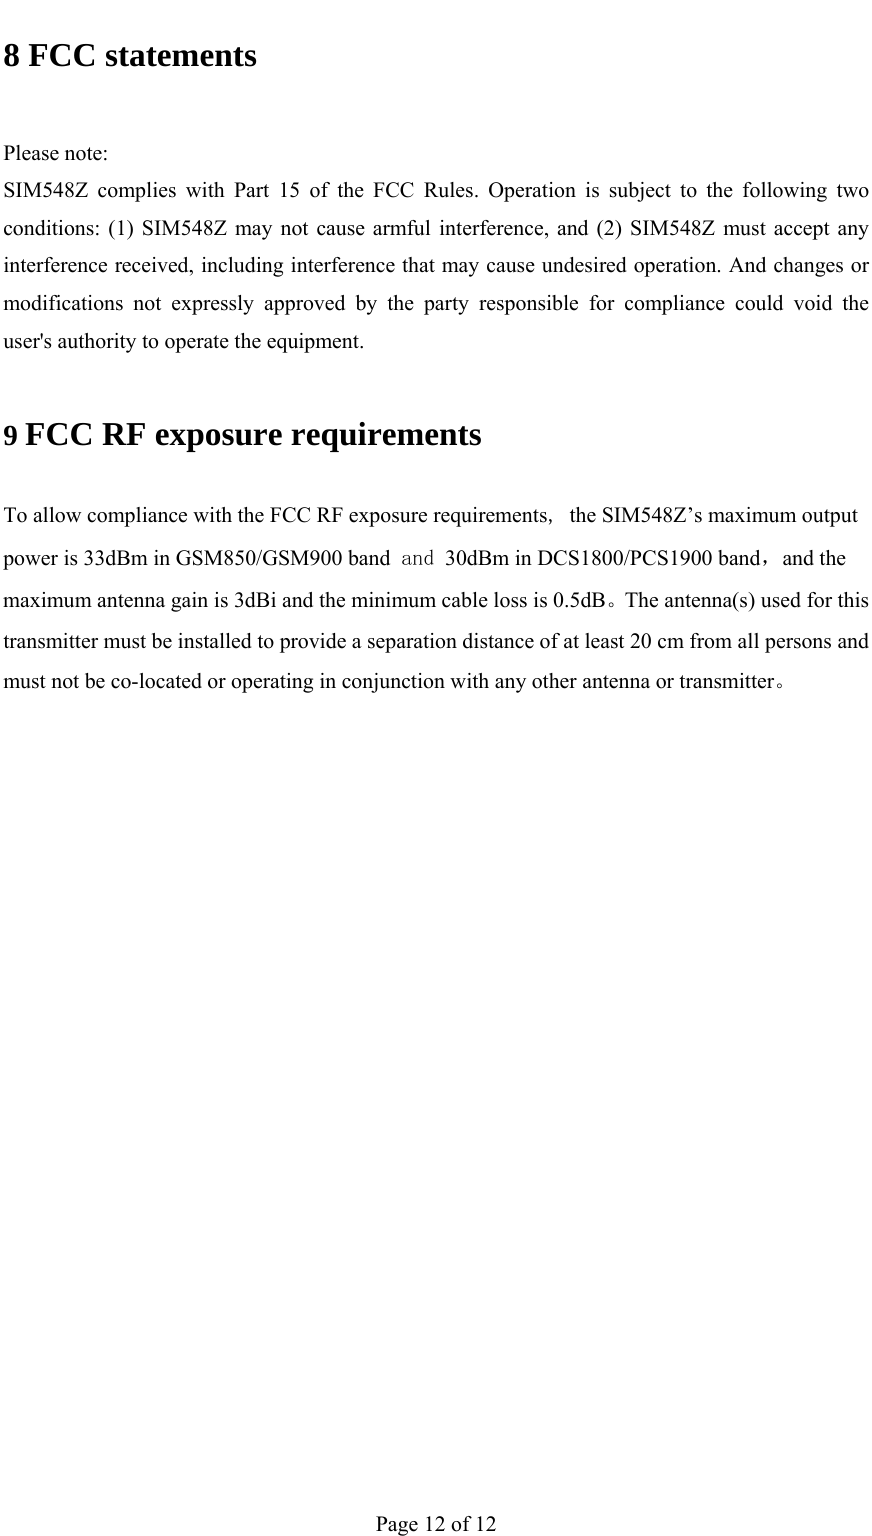                                           8 FCC statements  Please note: SIM548Z complies with Part 15 of the FCC Rules. Operation is subject to the following two conditions: (1) SIM548Z may not cause armful interference, and (2) SIM548Z must accept any interference received, including interference that may cause undesired operation. And changes or modifications not expressly approved by the party responsible for compliance could void the user&apos;s authority to operate the equipment. 9 FCC RF exposure requirements To allow compliance with the FCC RF exposure requirements, the SIM548Z’s maximum output power is 33dBm in GSM850/GSM900 band and 30dBm in DCS1800/PCS1900 band，and the maximum antenna gain is 3dBi and the minimum cable loss is 0.5dB。The antenna(s) used for this transmitter must be installed to provide a separation distance of at least 20 cm from all persons and must not be co-located or operating in conjunction with any other antenna or transmitter。    Page 12 of 12 